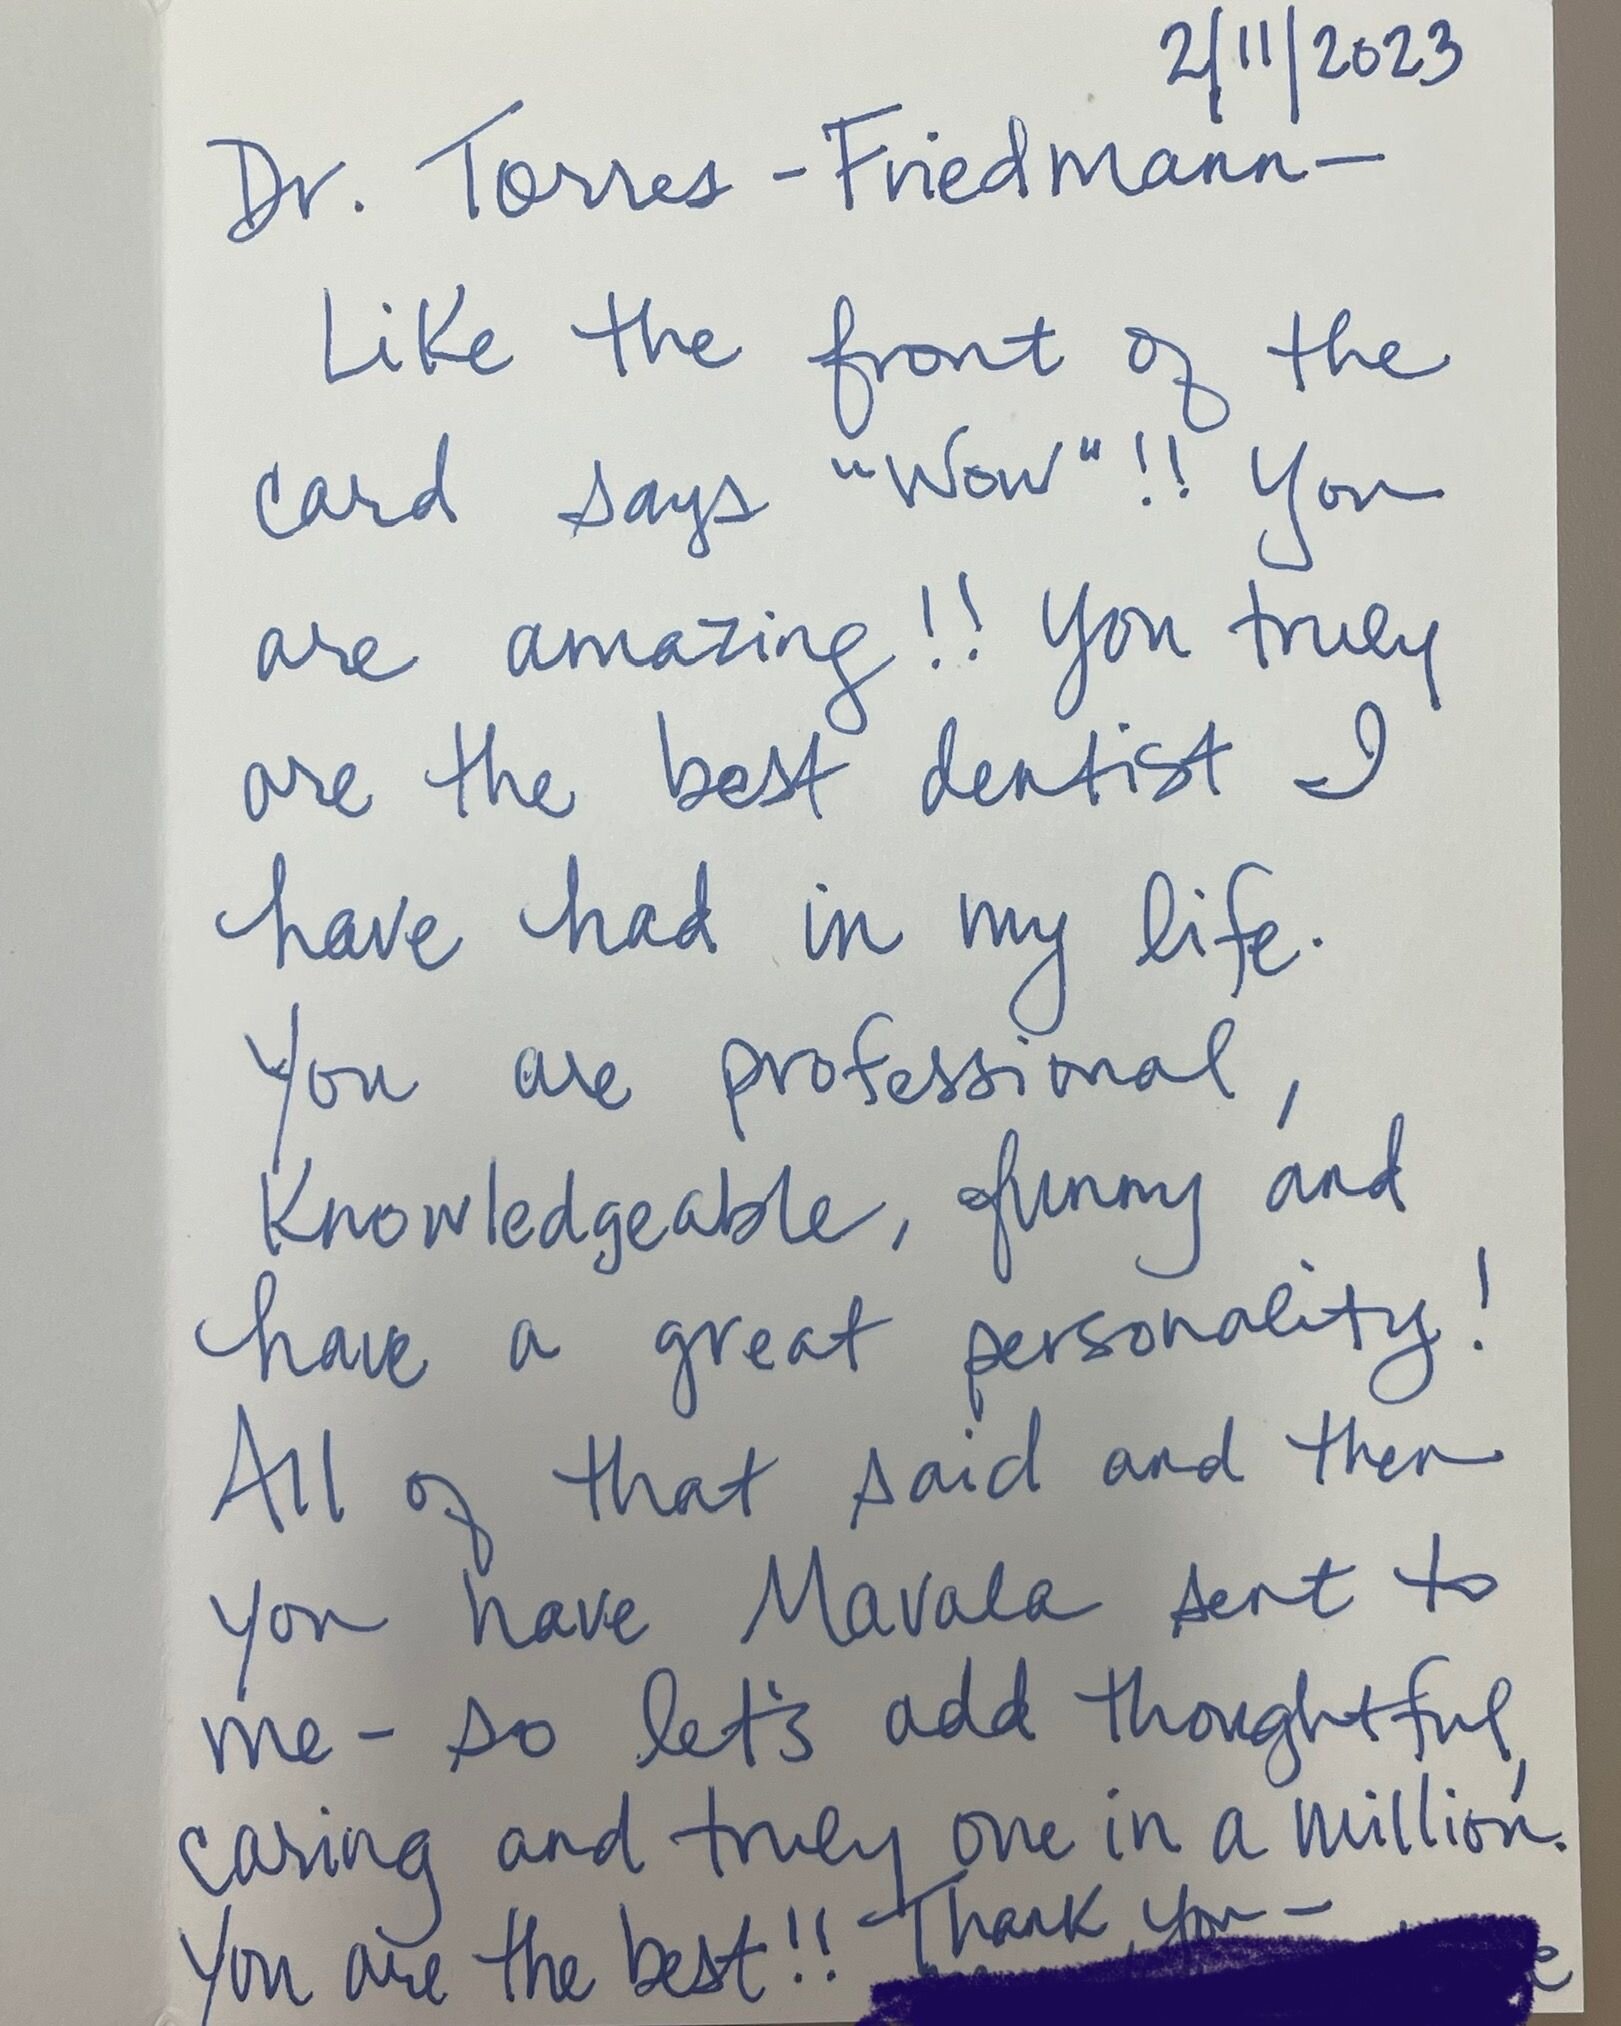 We love our patients! Dr. Torres-Friedmann received this wonderful card from one of our amazing patients❤ We so greatly appreciate the kind words! Our favorite things to do are creating beautiful smiles and making our patients happy! 

#UDG #HappyPat